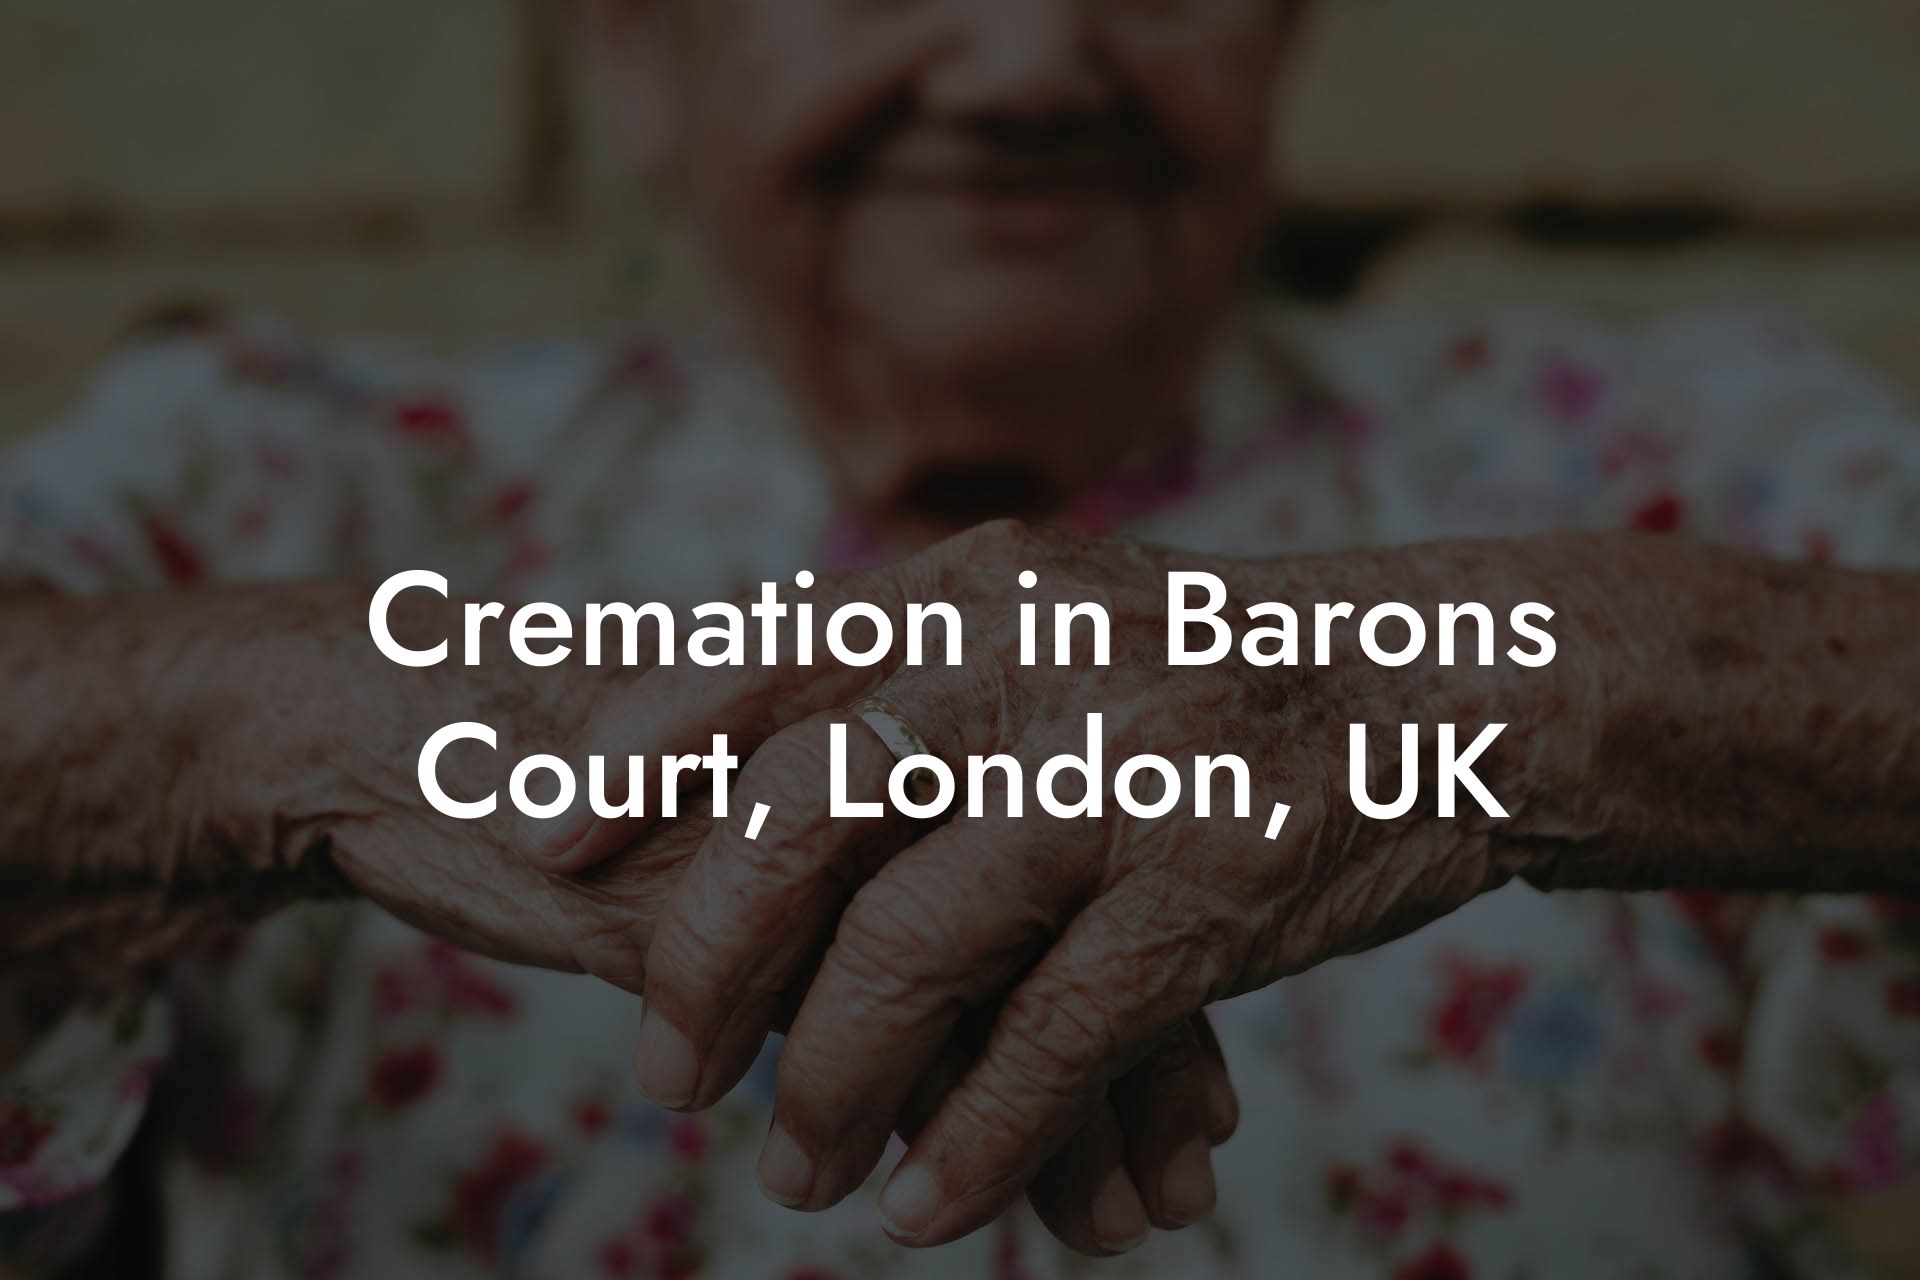 Cremation in Barons Court, London, UK